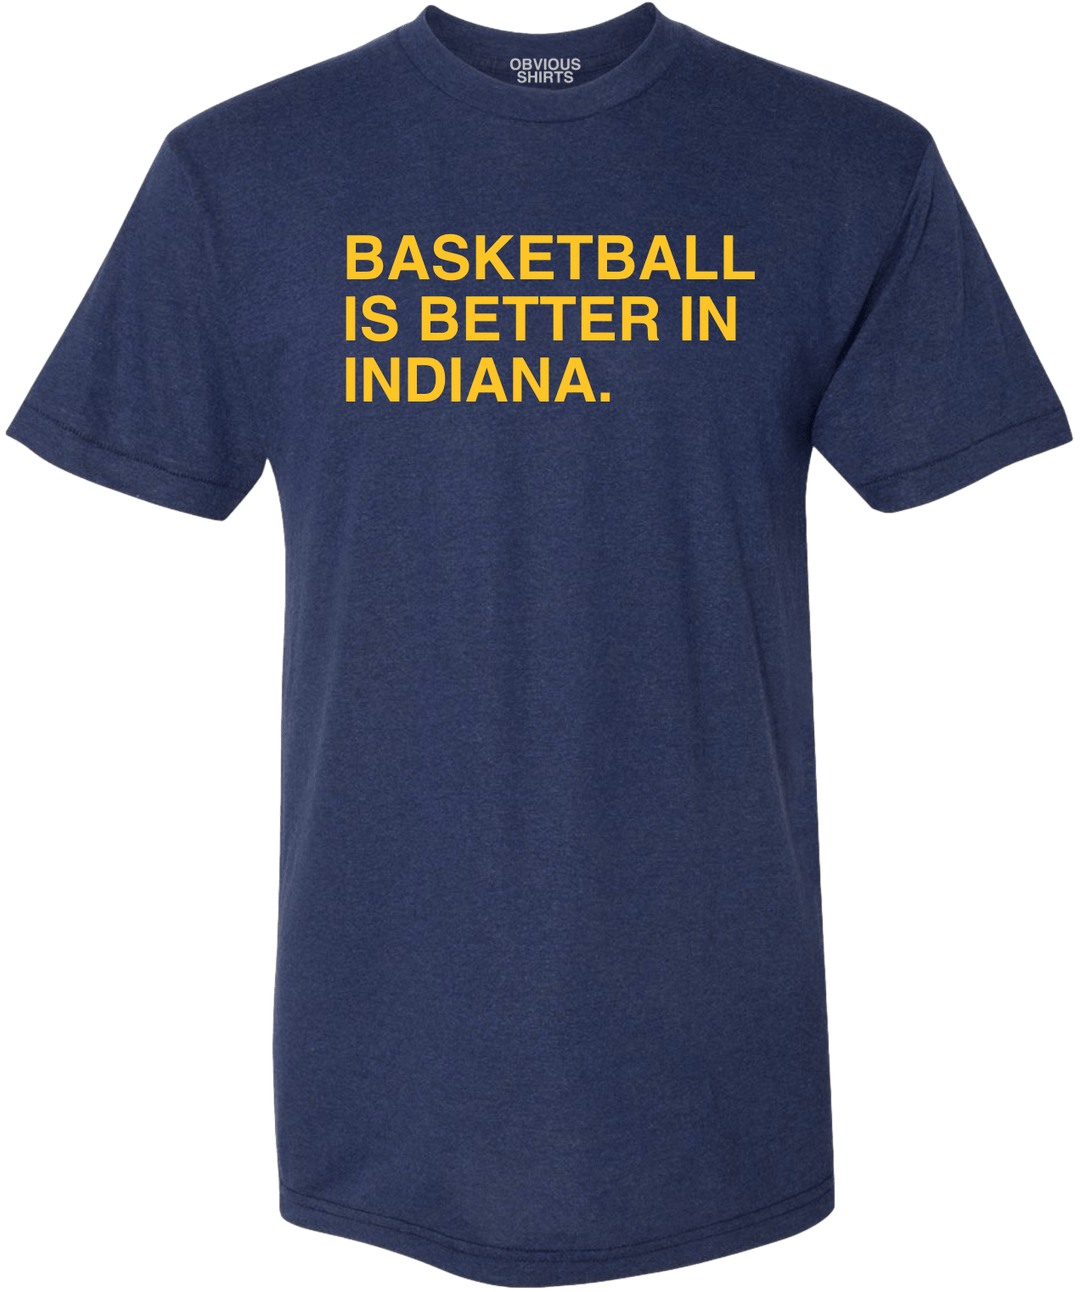 BASKETBALL IS BETTER IN INDIANA. (INDY) - OBVIOUS SHIRTS